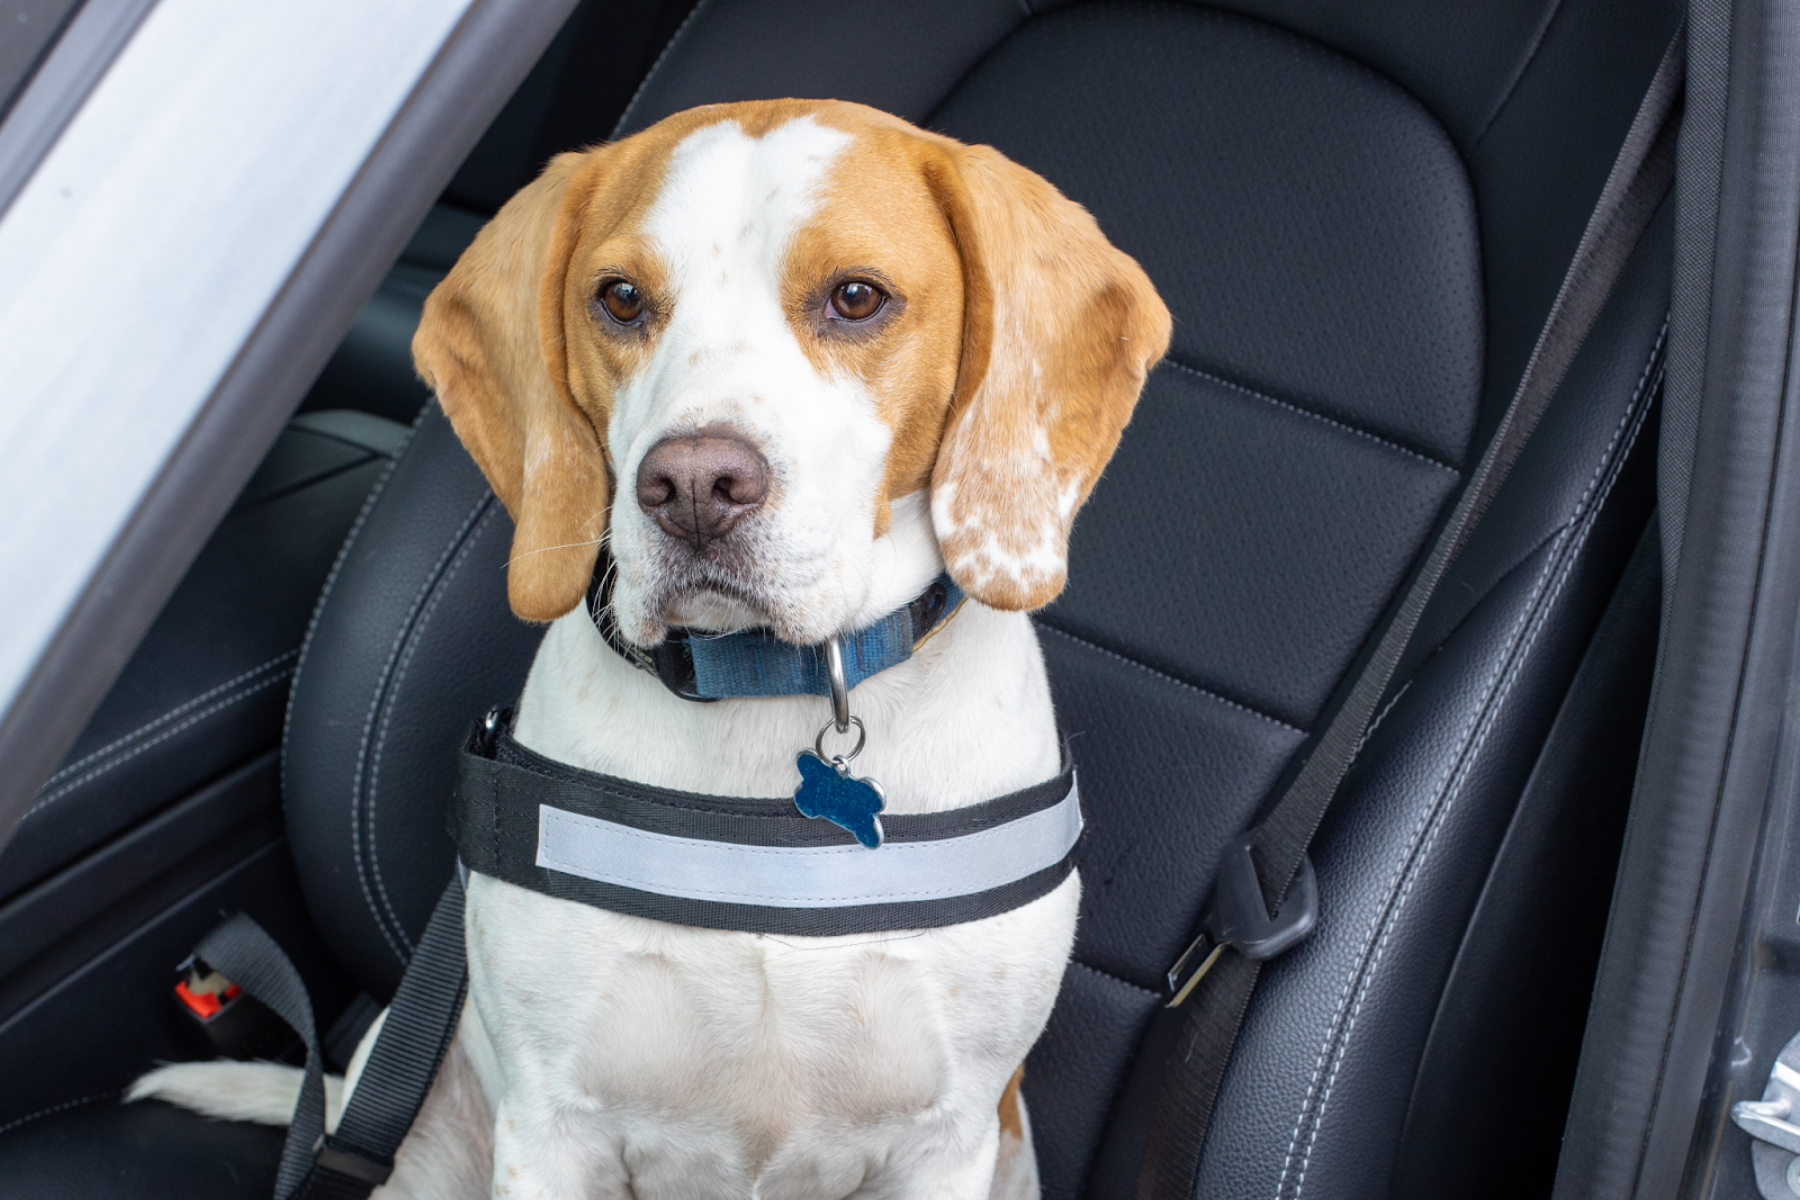 Warning driving with a dog in your car could land you £5,000 fine